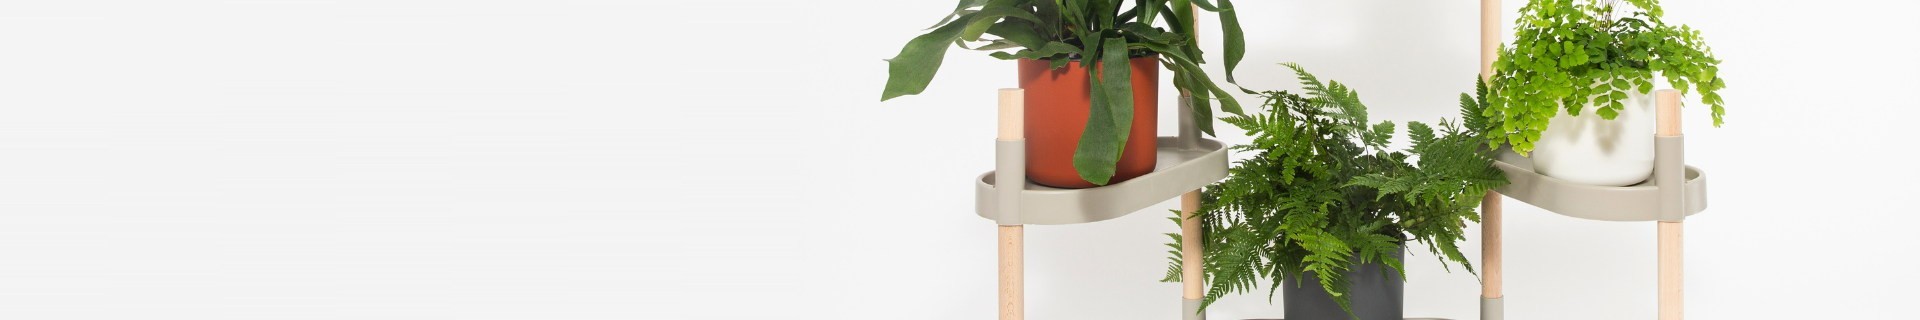 Refurbished Furniture: Sustainable Planters Made in Spain | CitySens